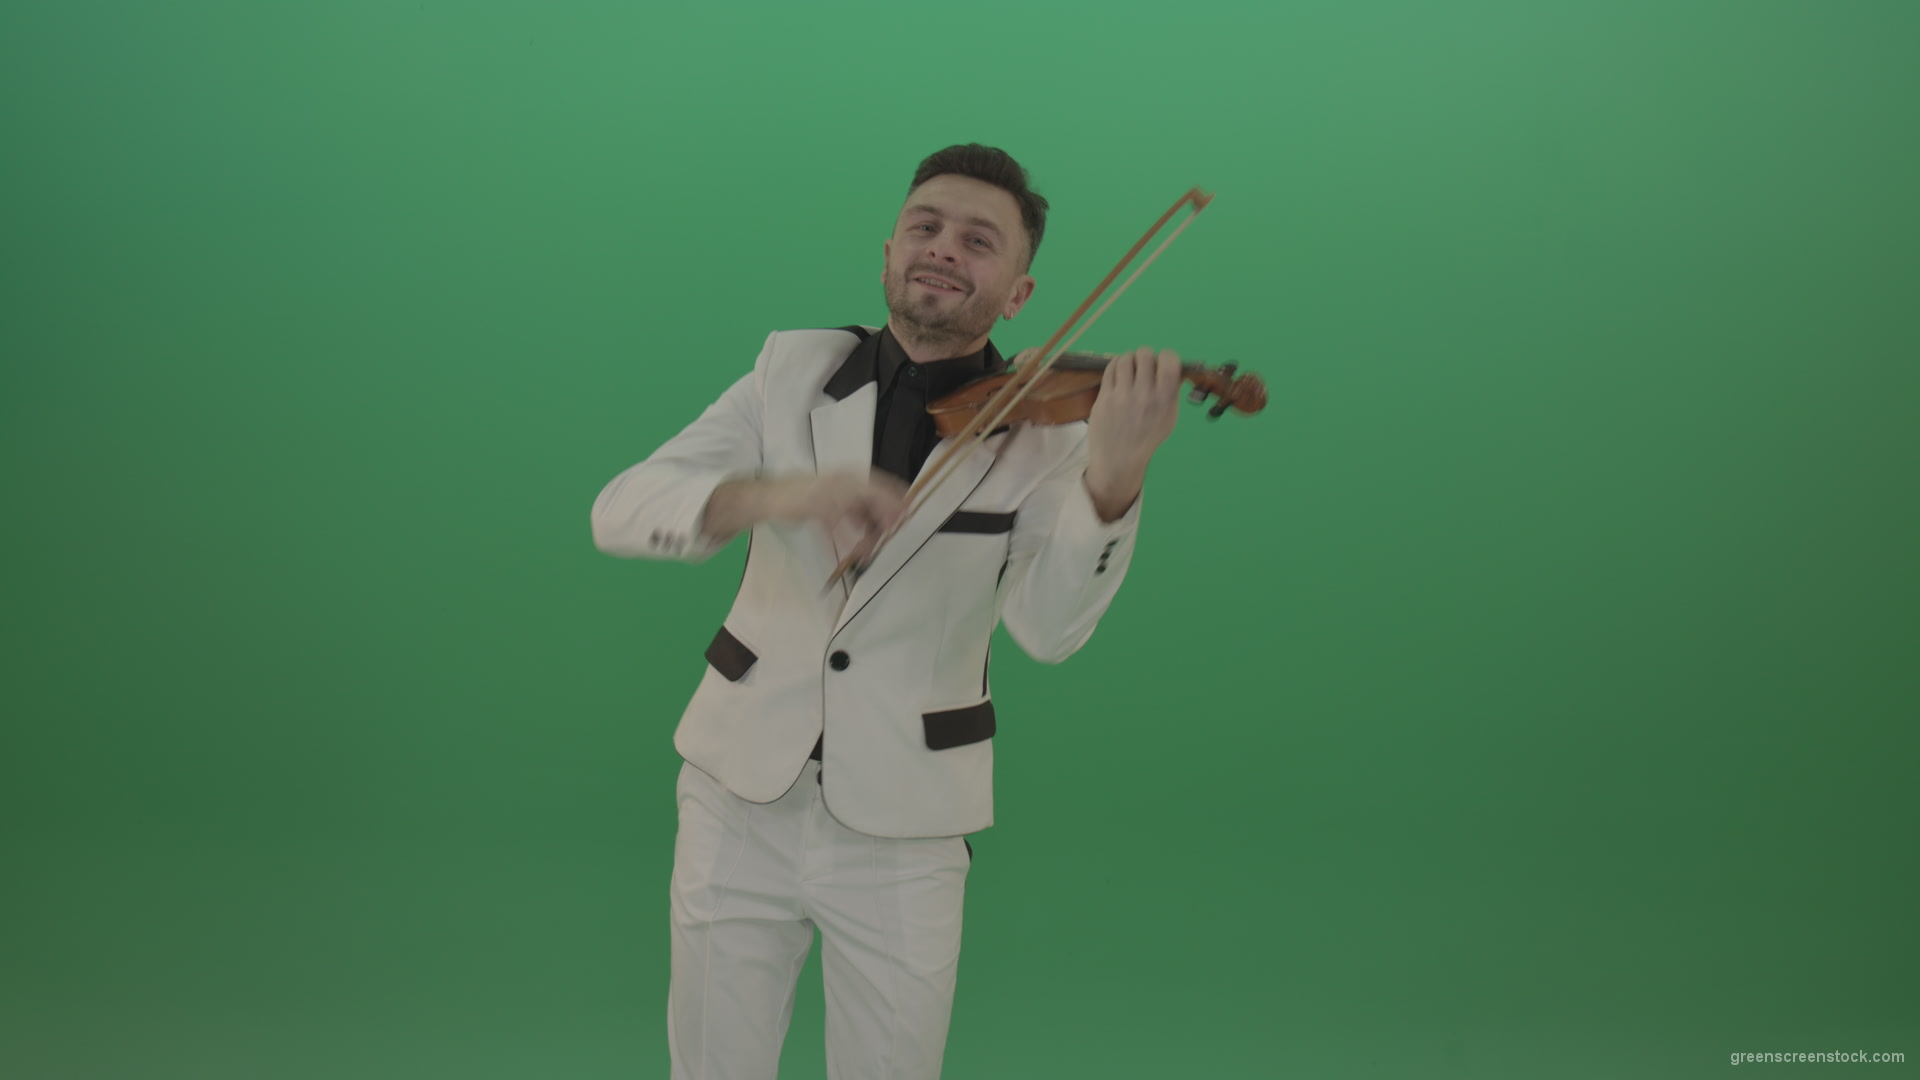 Happy-man-in-white-costume-dramatic-playing-violin-music-instrument-isolated-on-green-screen_004 Green Screen Stock